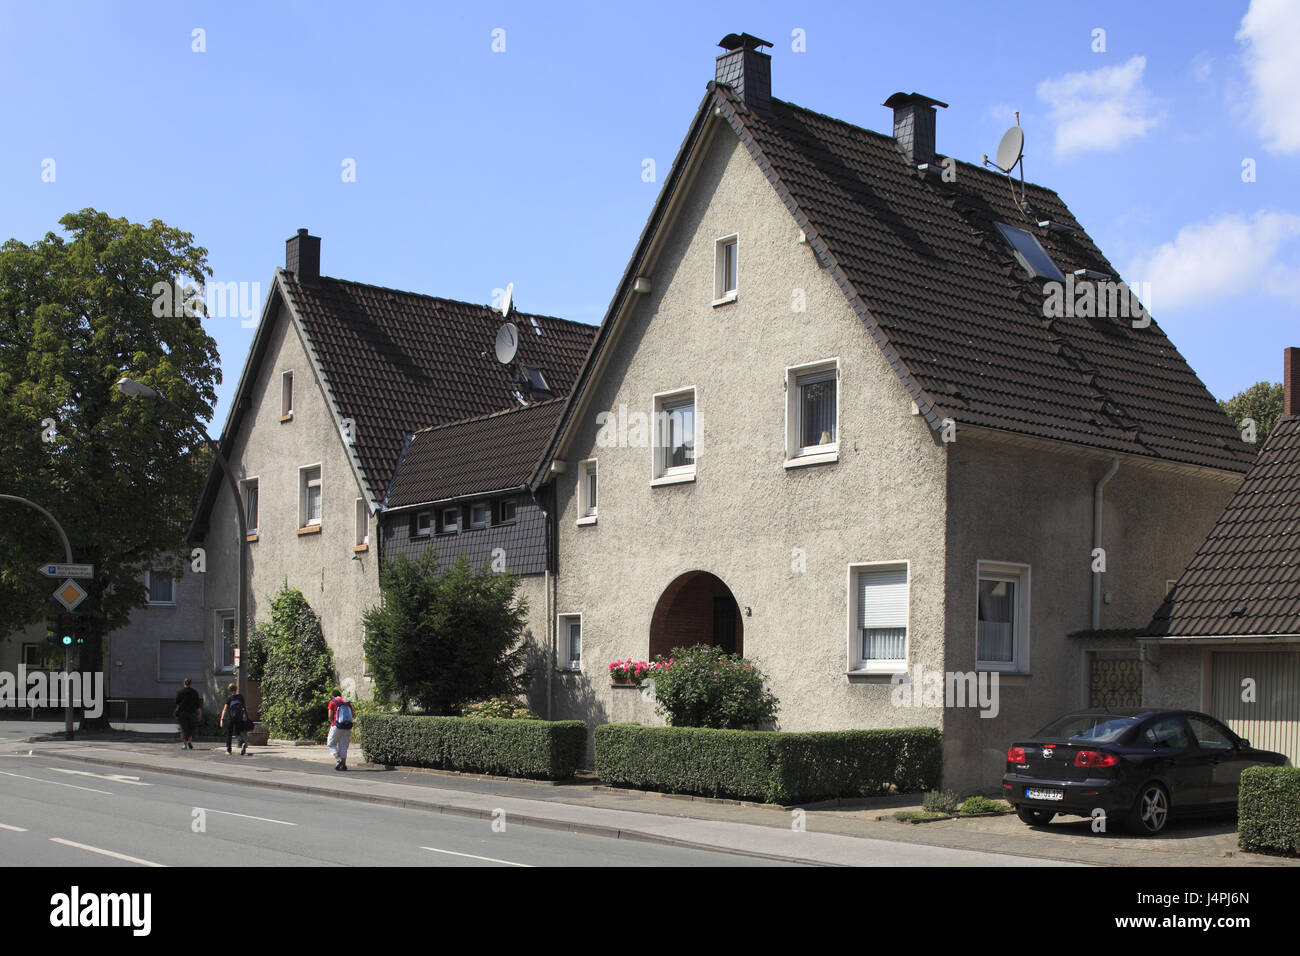 Germany, Duisburg, dysentery area, North Rhine-Westphalia, Duisburg-Rheinhausen, Duisburg-Rheinhausen-Hochemmerich, Margarethensiedlung, garden city, residential house, Stock Photo